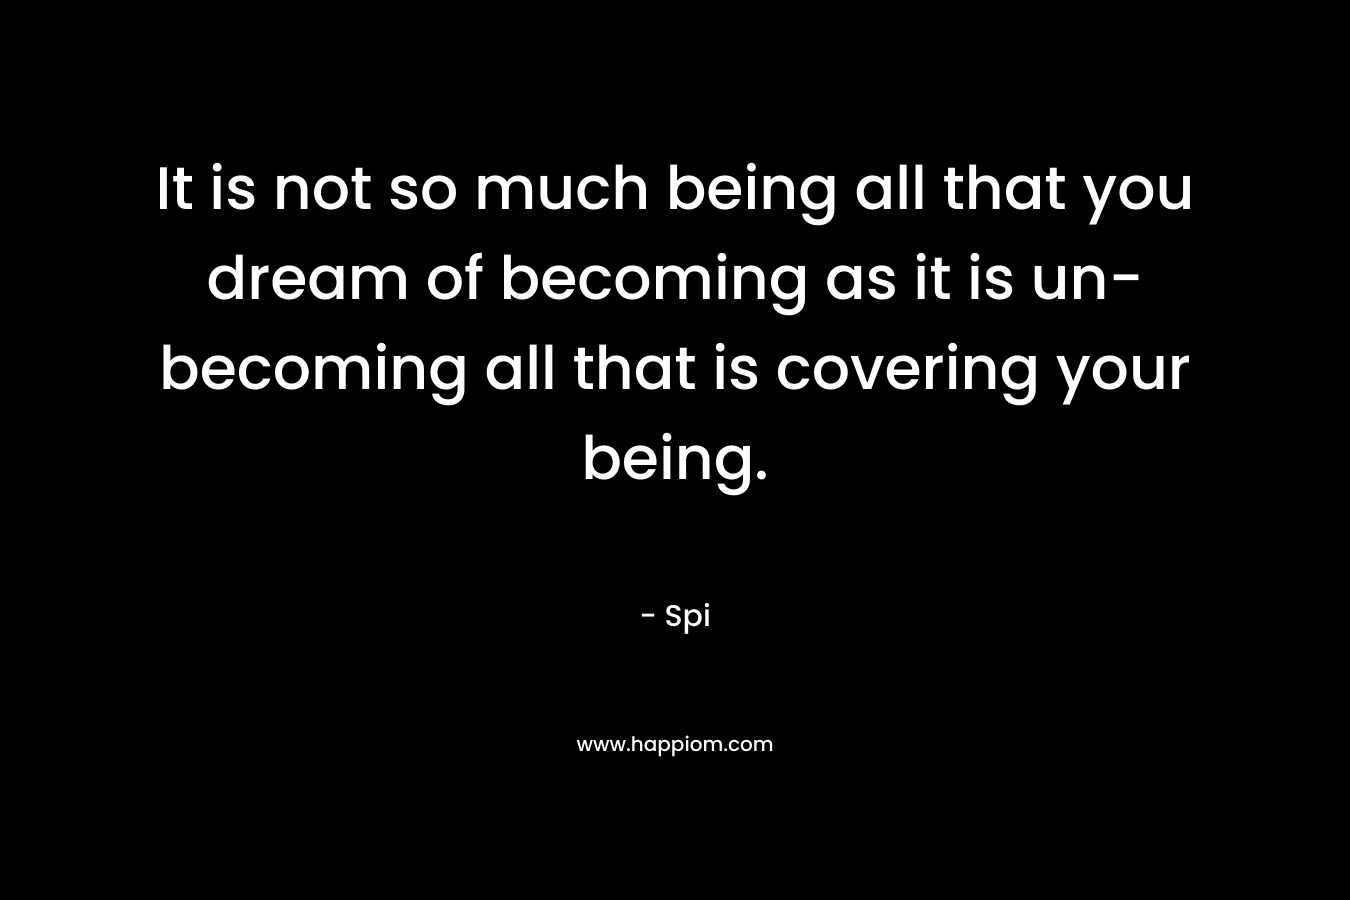 It is not so much being all that you dream of becoming as it is un-becoming all that is covering your being.